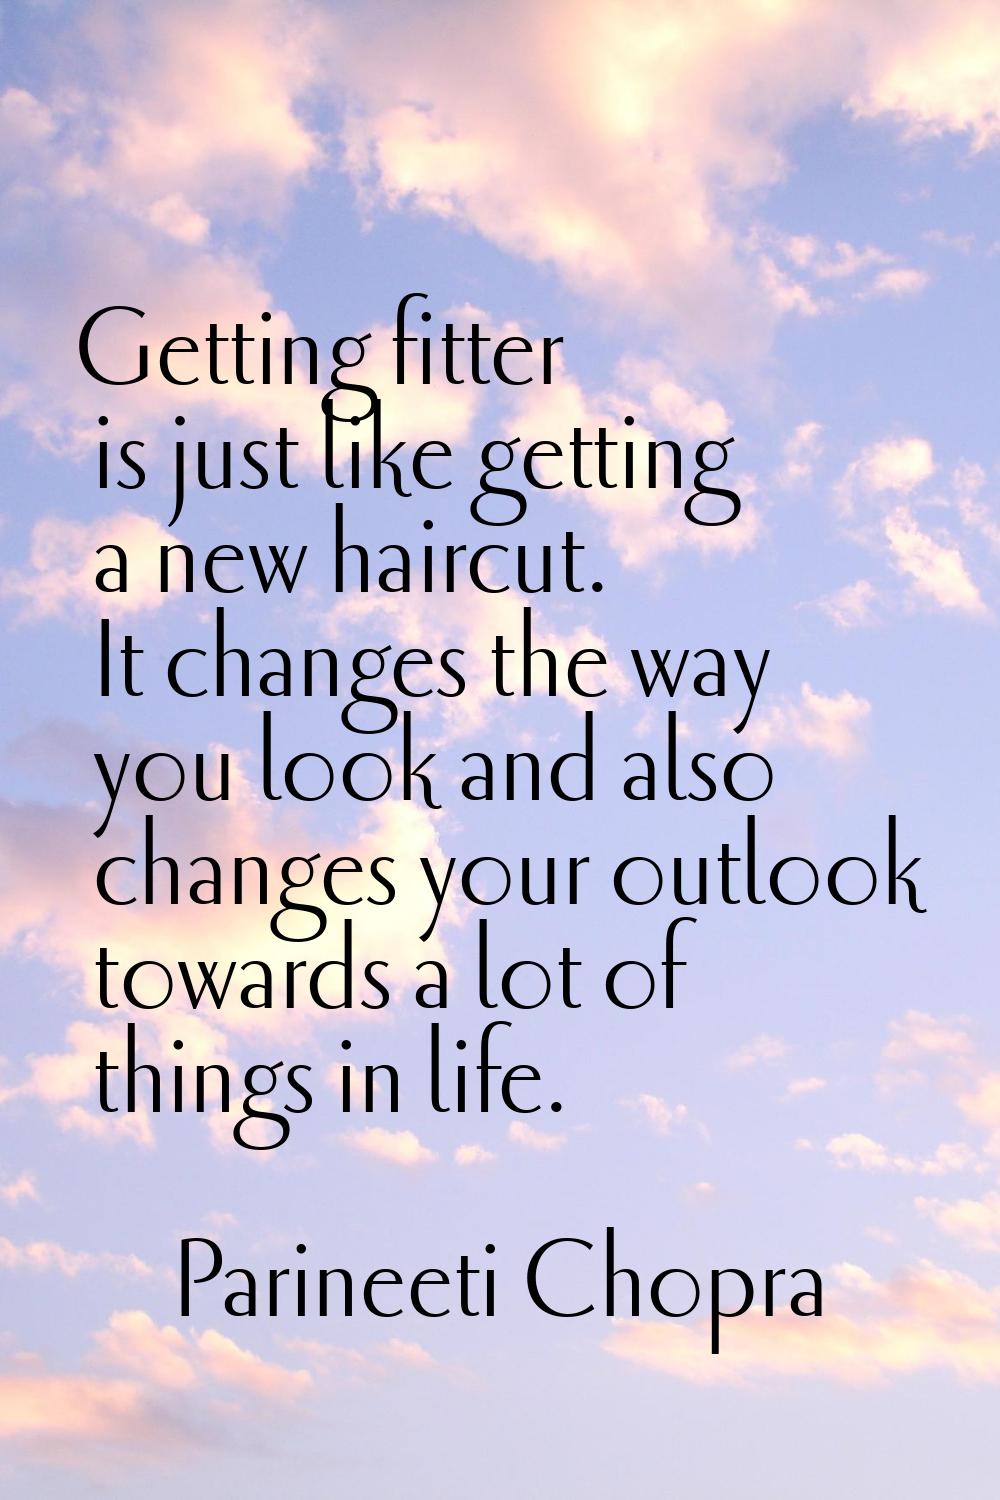 Getting fitter is just like getting a new haircut. It changes the way you look and also changes you